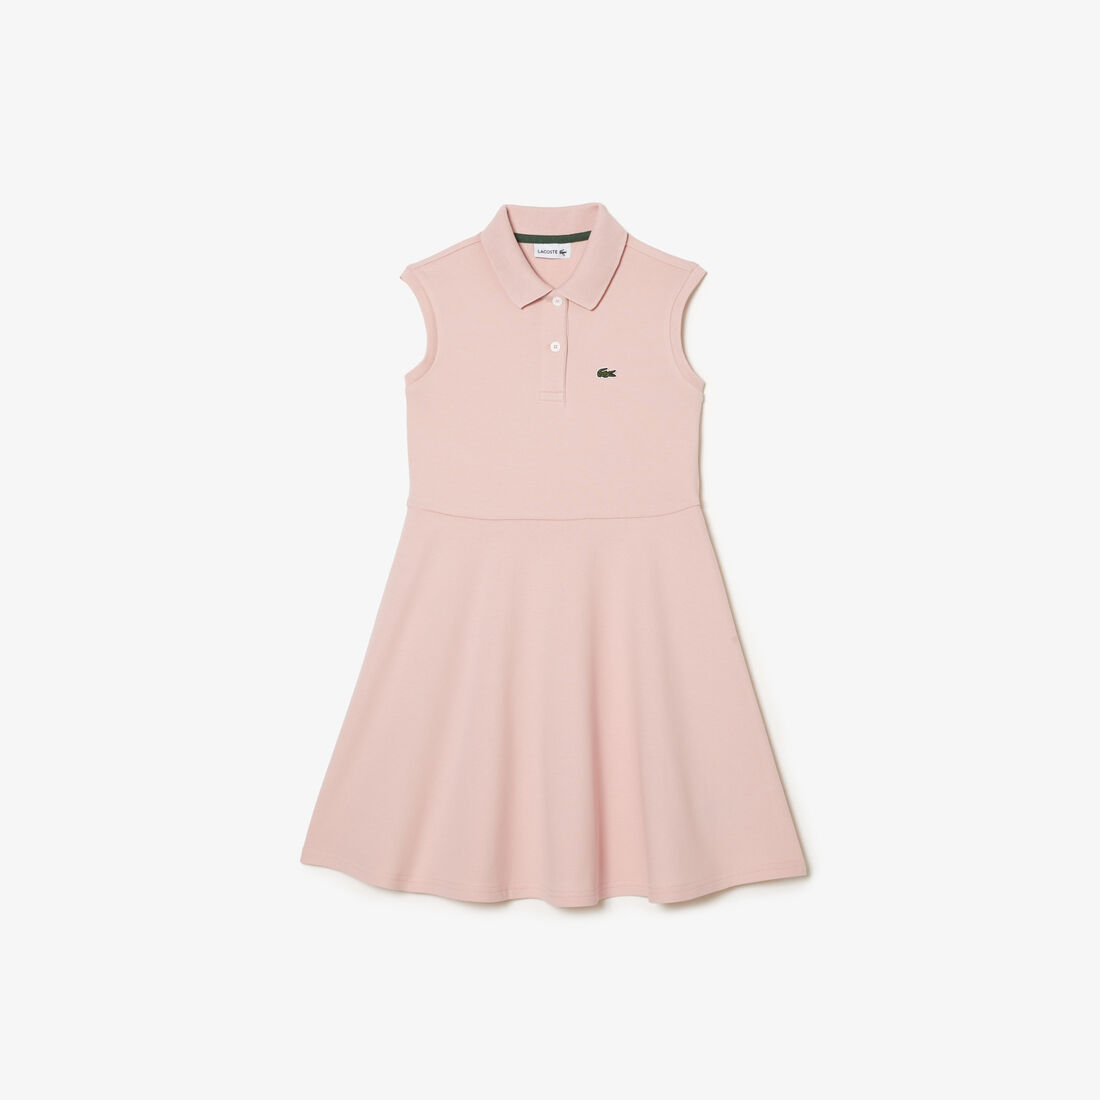 Girls' Lacoste Fit and Flare Stretch Pique Polo Dress